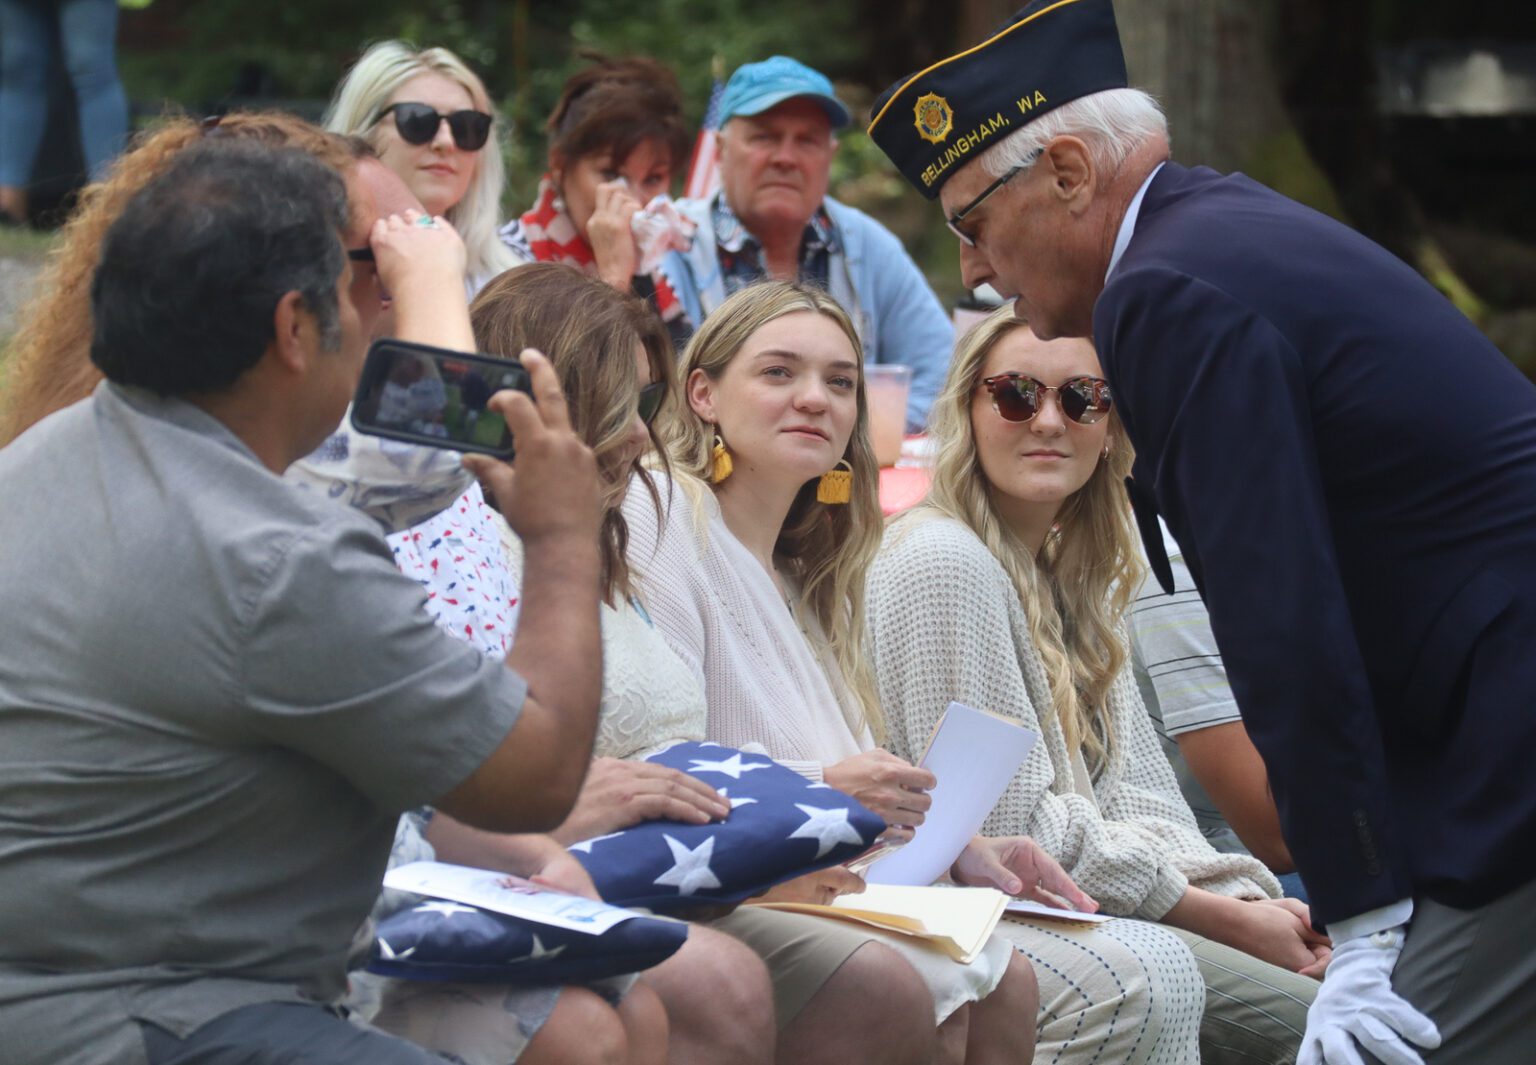 A member of the American Legion veterans organization speaks to the family of Buddy Fritz Partridge Jr. during the celebration of life ceremony on July 2 at Larrabee State Park. Several veterans groups presented flags and spoke with the family during the ceremony after the 21-gun salute and the playing of "Taps."